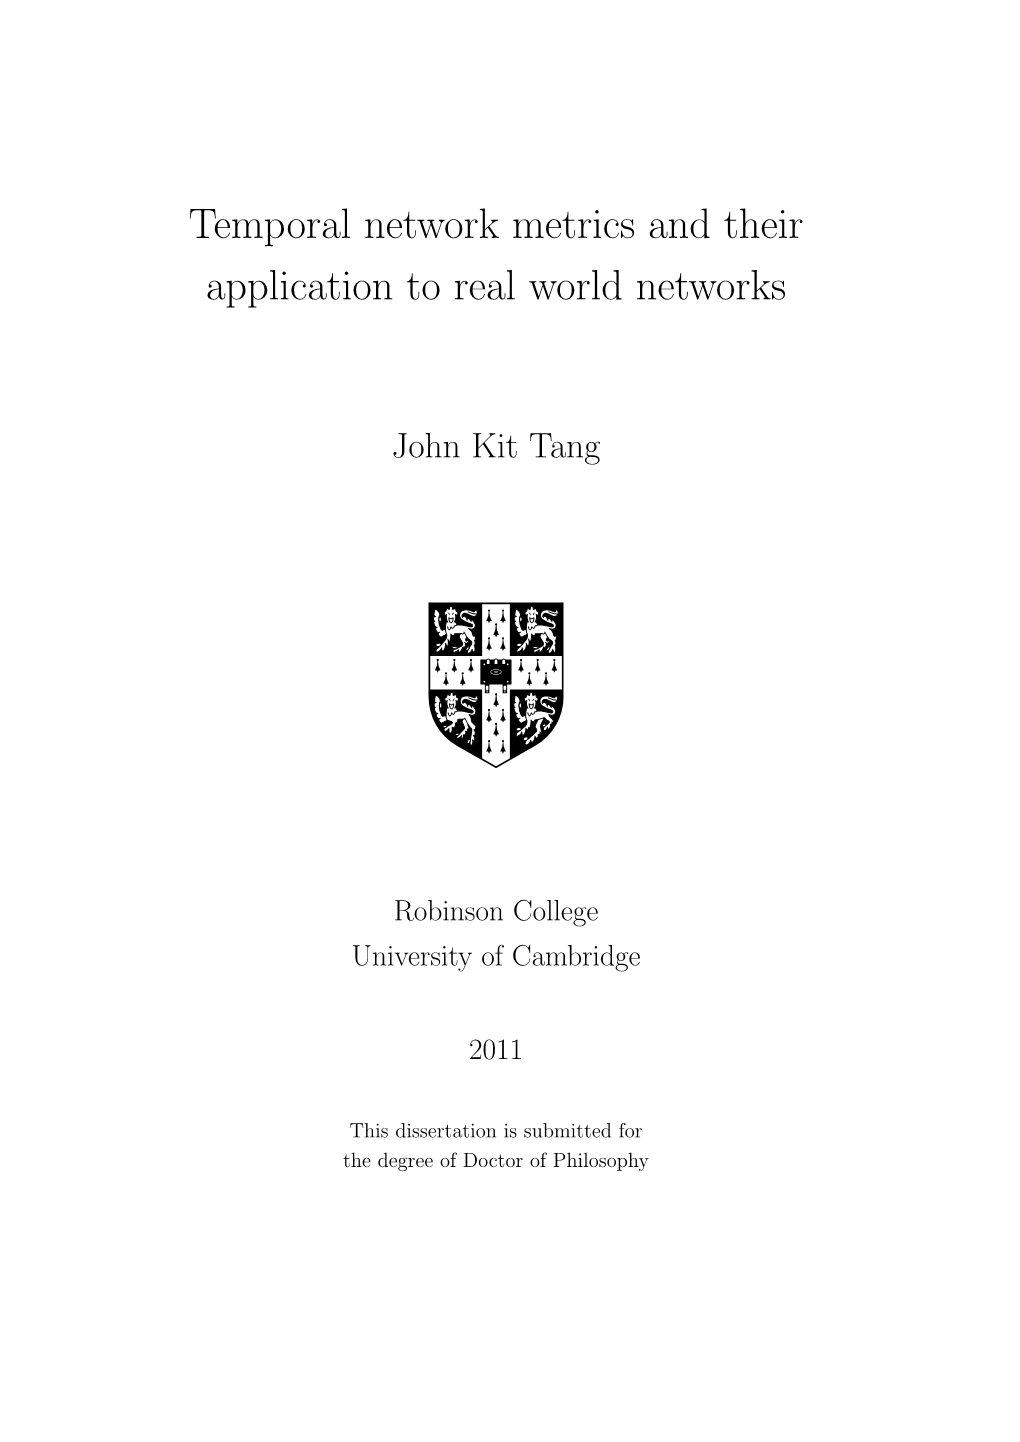 Temporal Network Metrics and Their Application to Real World Networks